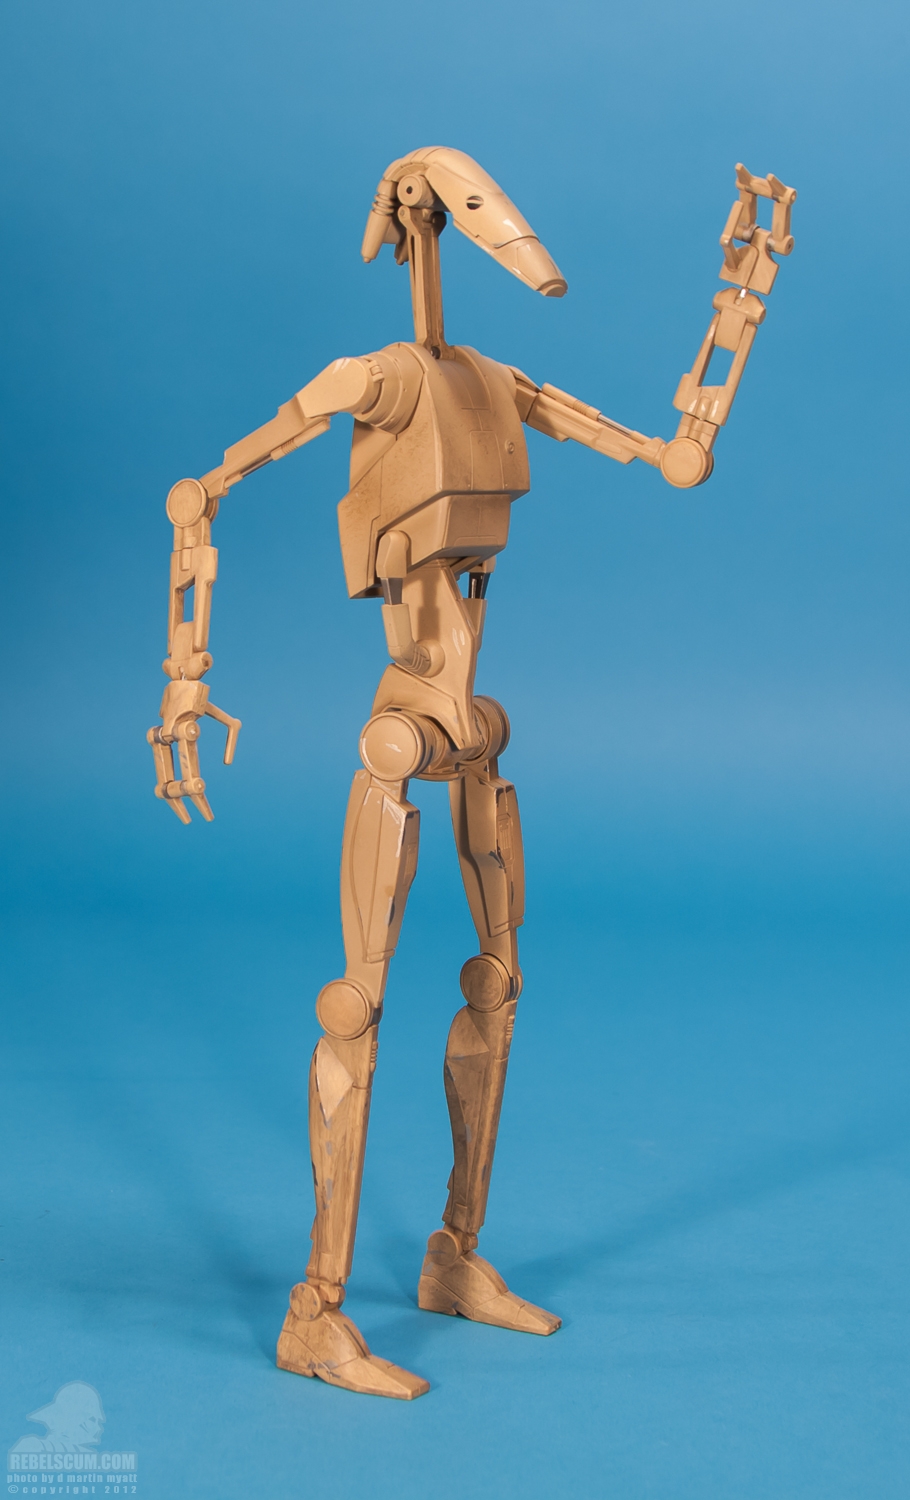 STAP_Battle_Droid_Star_Wars_Sideshow_Collectibles-06.jpg